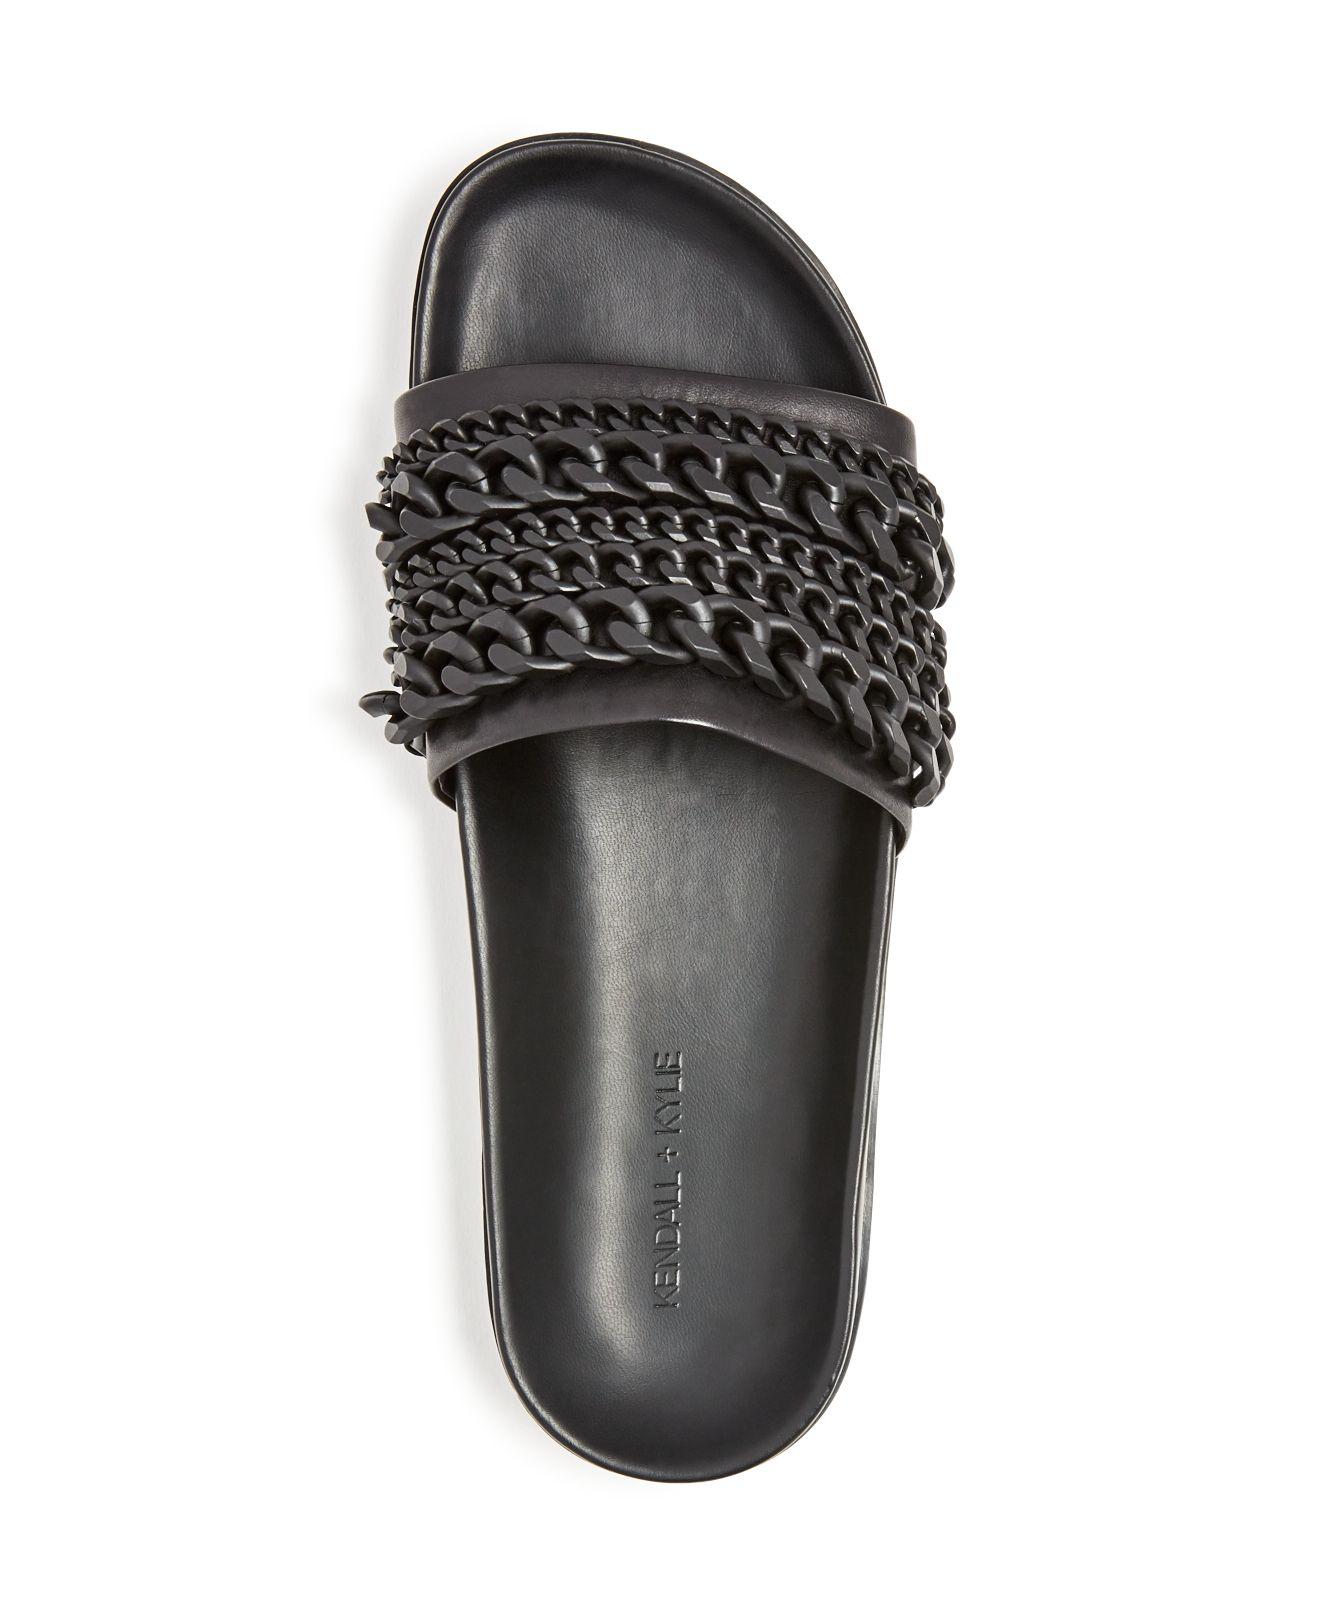 Kendall + Kylie Shiloh Chain Pool Slide Sandals in Black | Lyst